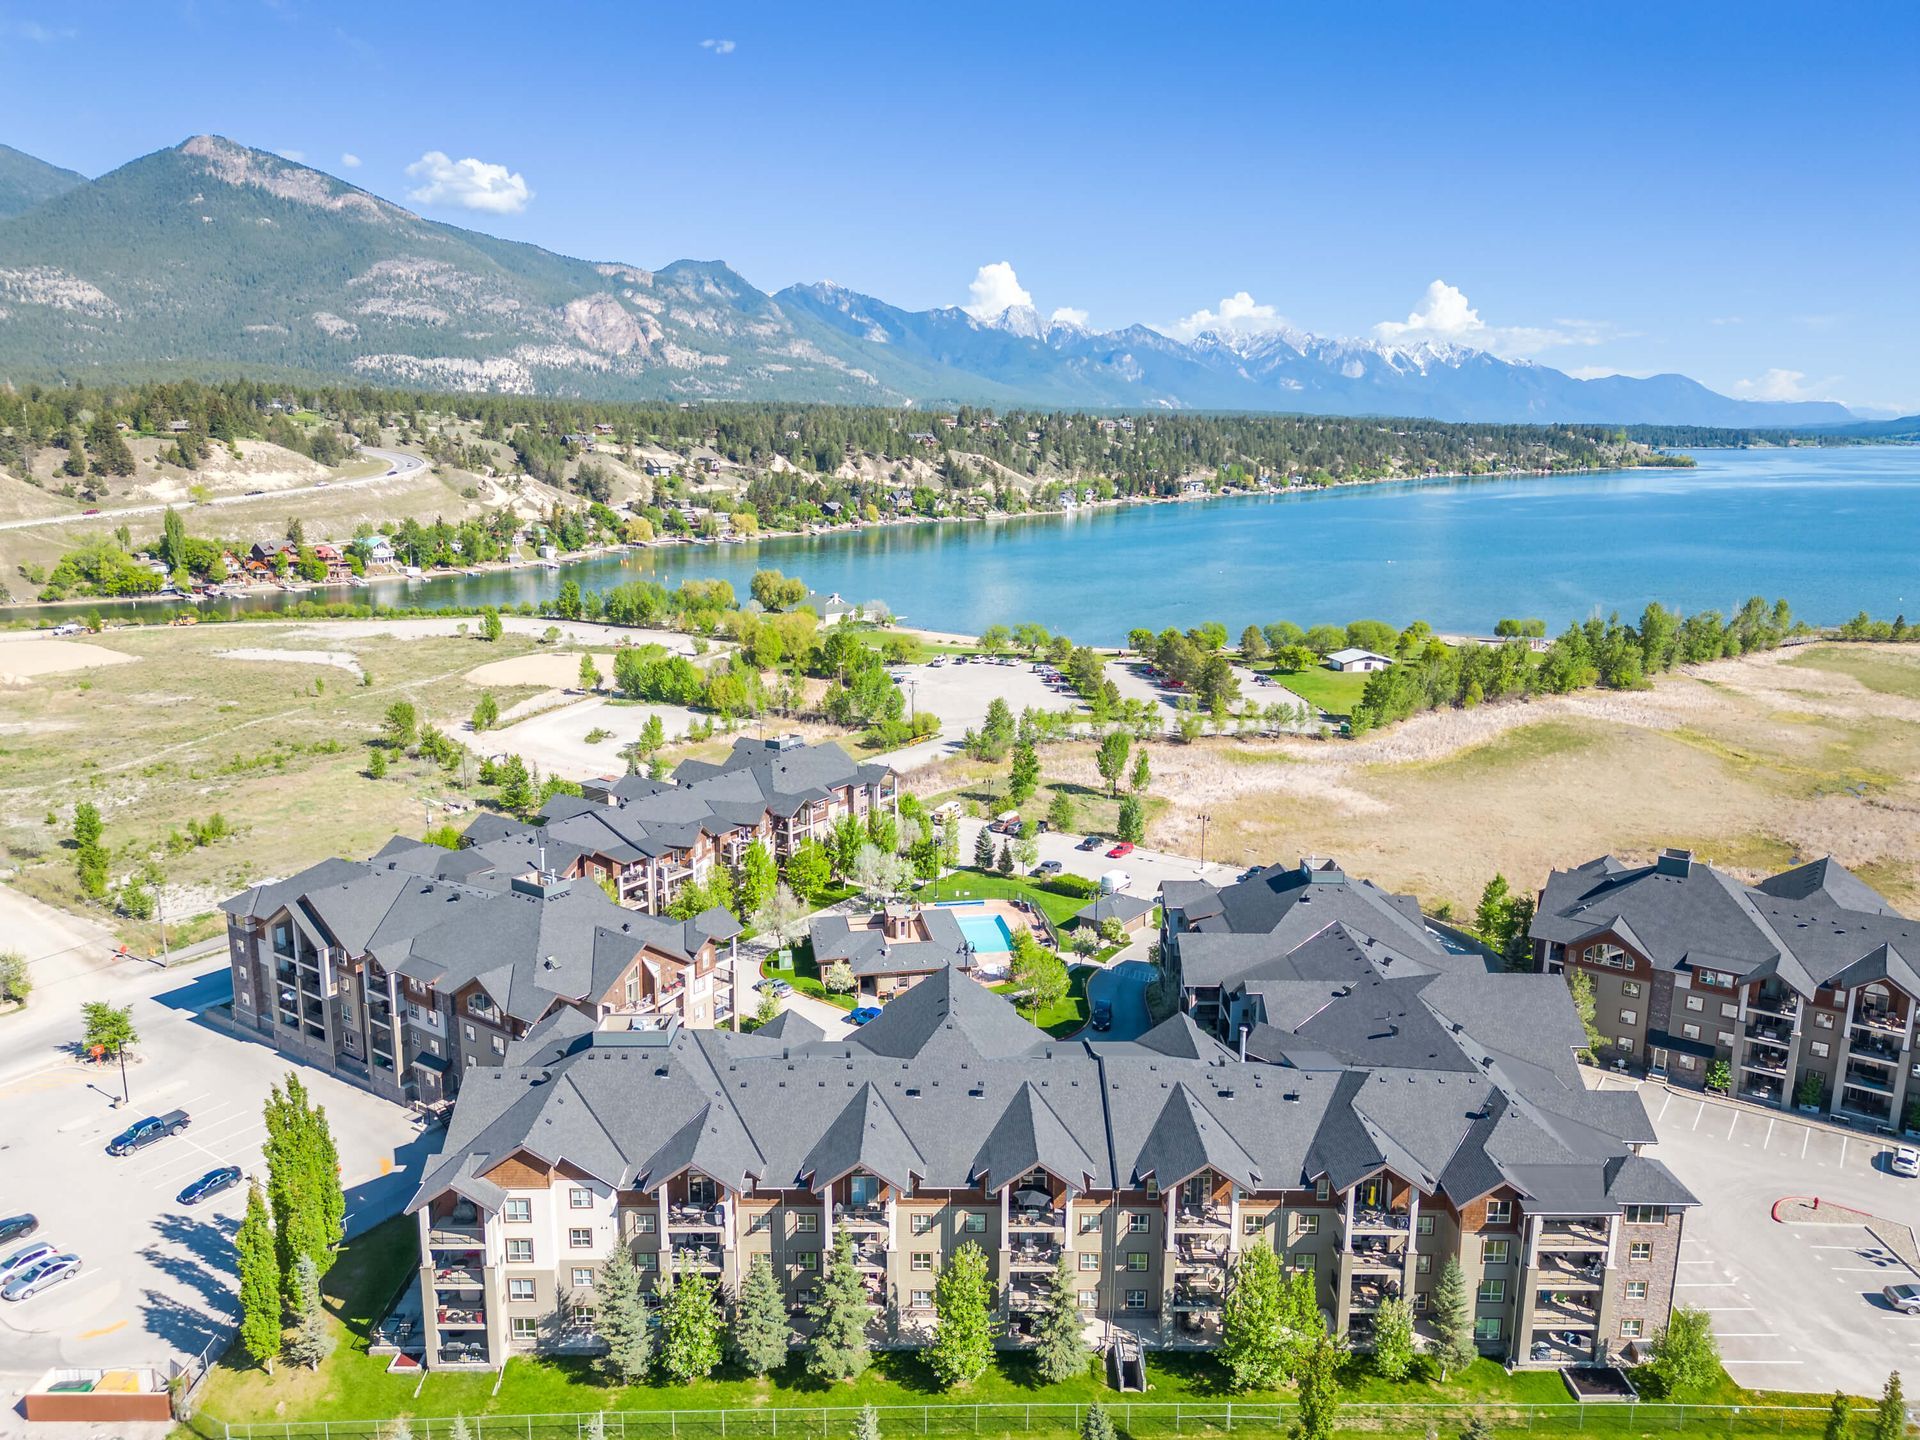 the Lake Windermere Pointe Condos in Invermere, BC managed by Aisling Baile Property Management